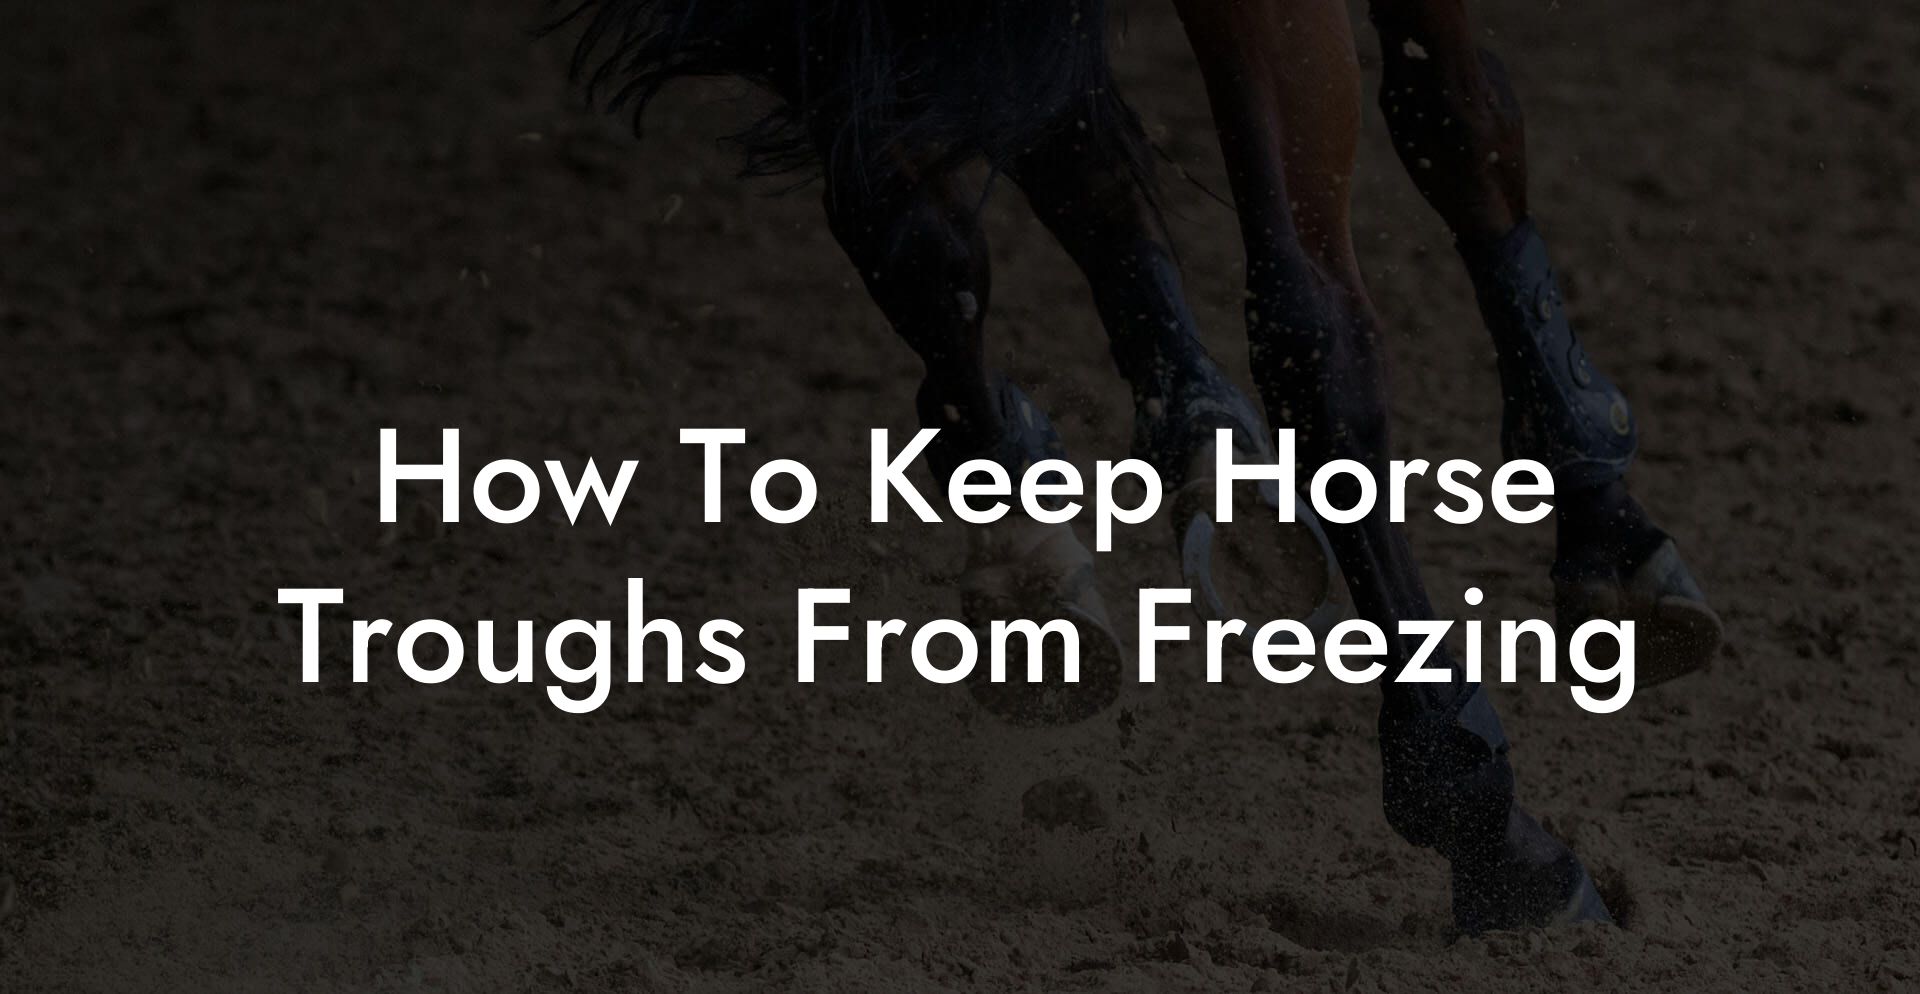 How To Keep Horse Troughs From Freezing